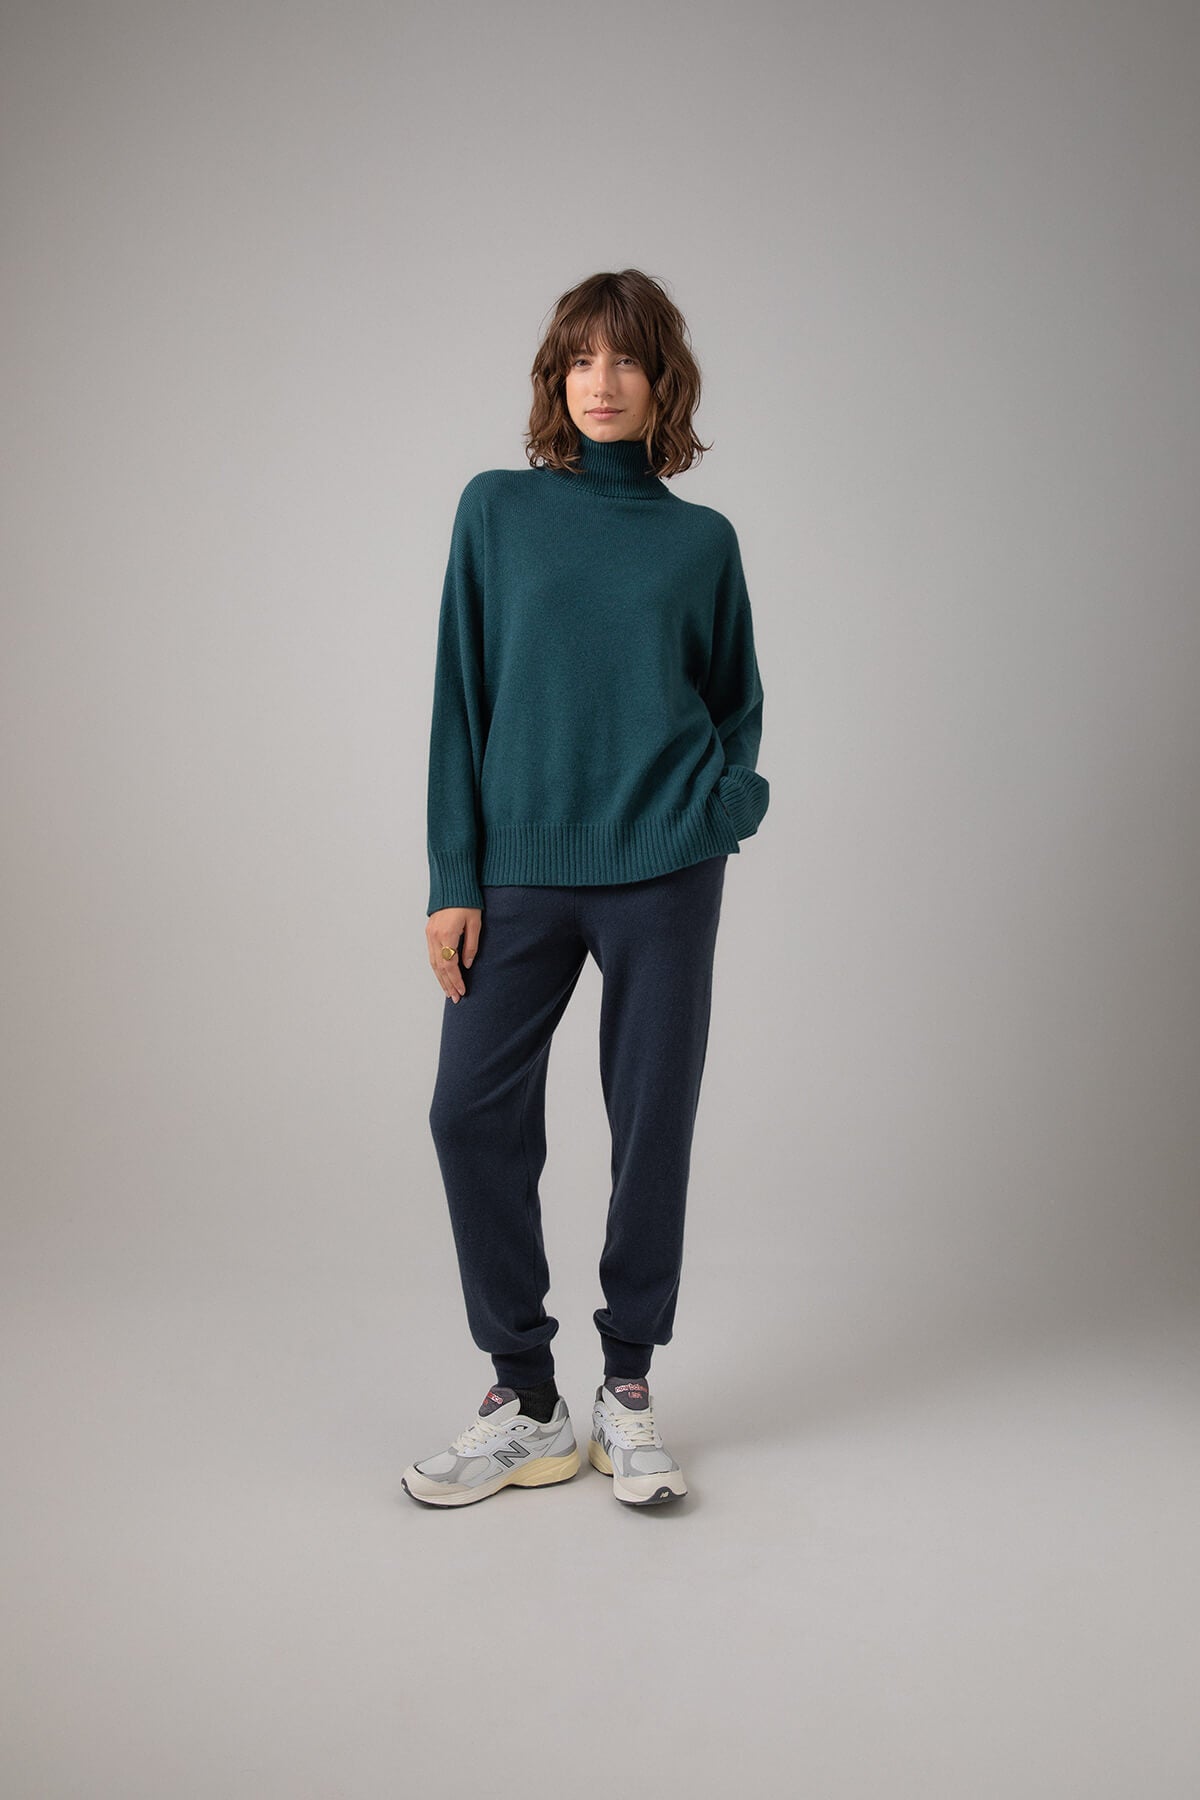 Johnstons of Elgin Women's Gauzy Cashmere Roll Neck with Stepped Hem in Mallard worn with Cashmere Joggers on a grey background KAI05100HC7126